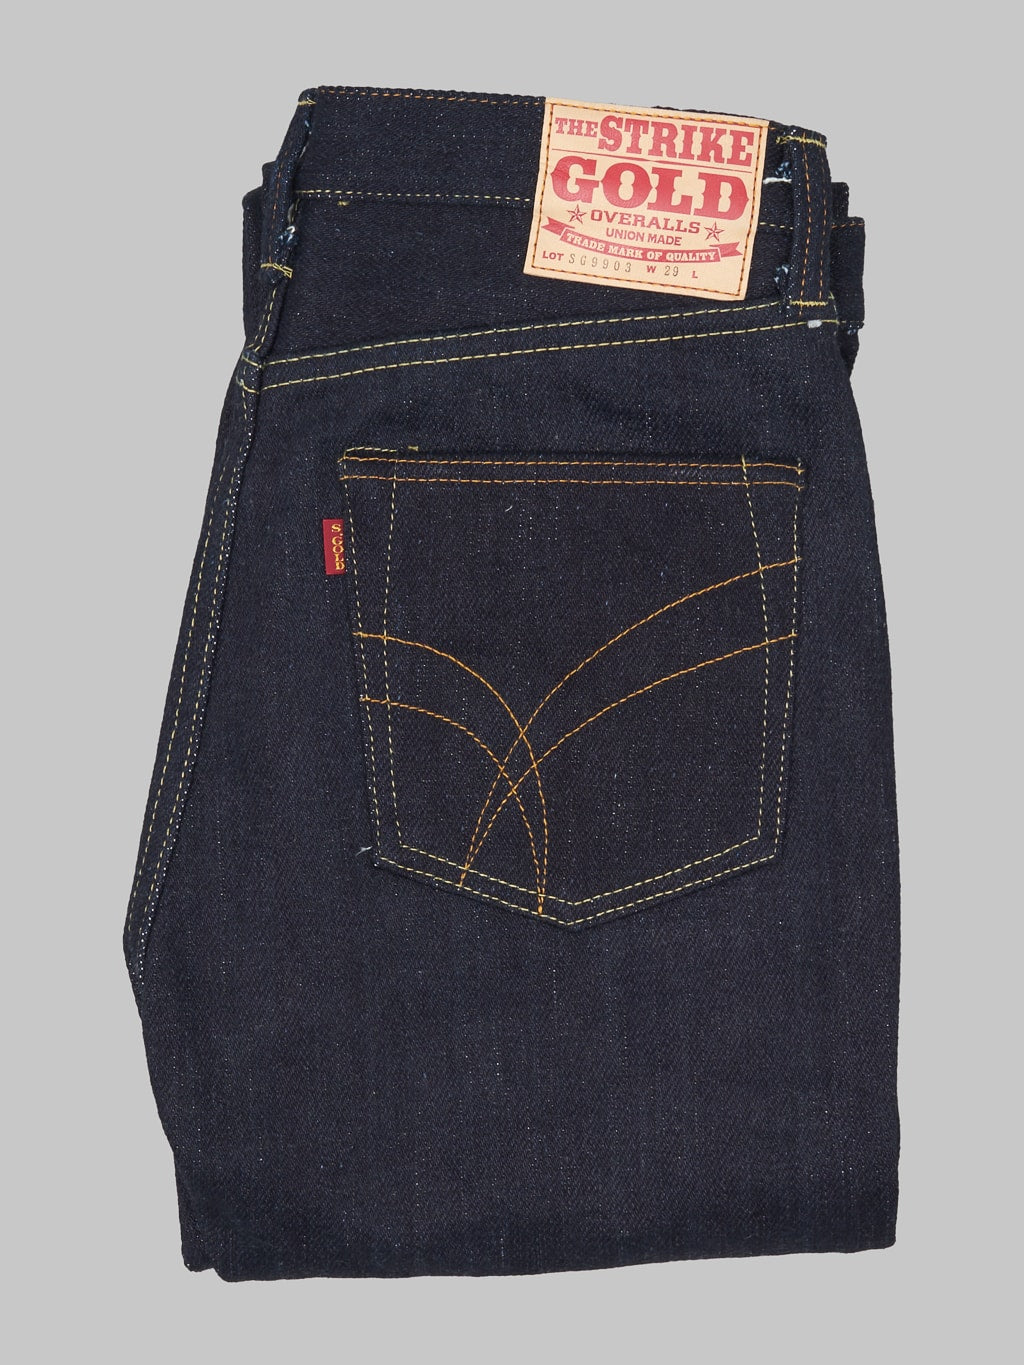 The Strike Gold Extra Heavyweight regular straight jeans stitching